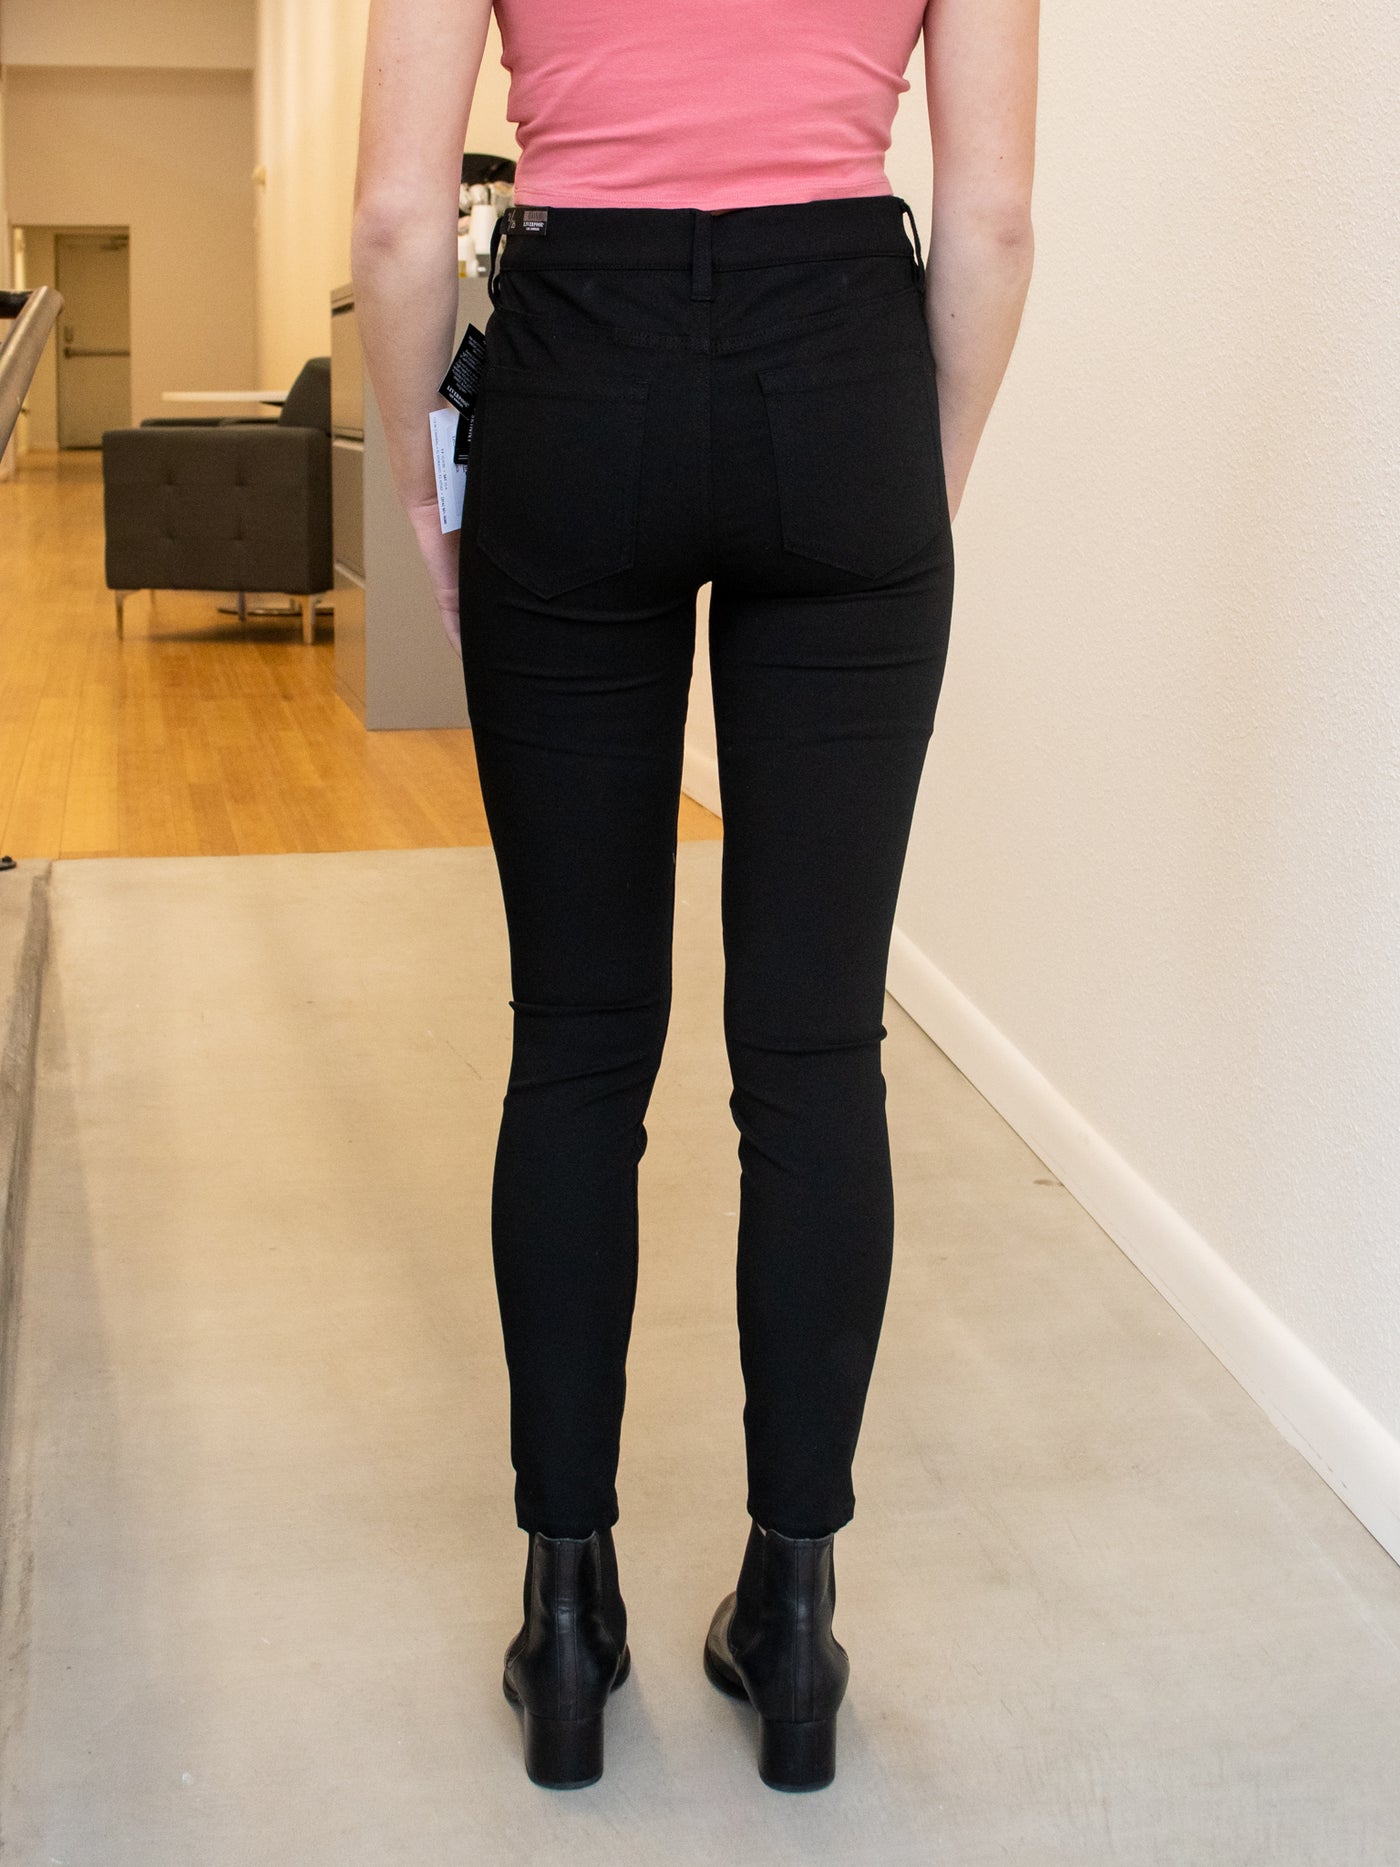 A model wearing a pair of black ankle length skinny pants with a pink tank, plaid blazer, and black booties.